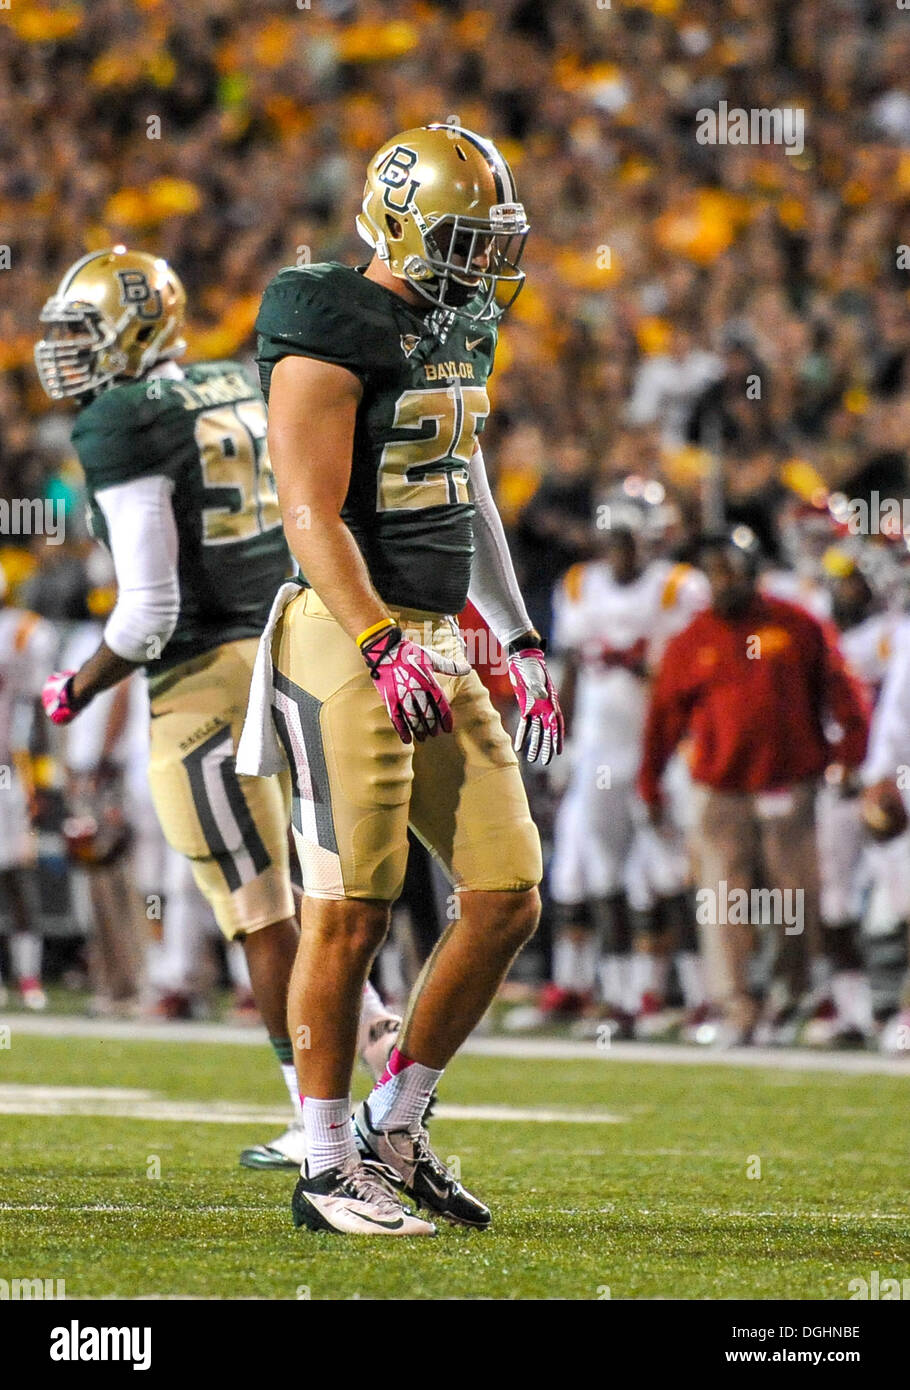 Baylor Bears defensive back Sam Holl (25) after a big hit.during an NCAA college football game between the Iowa State Cyclones and the Baylor Bears, Saturday at Floyd Casey Stadium, Oct. 19th, 2013 in Waco, Texas..Baylor wins 71-7.. Stock Photo